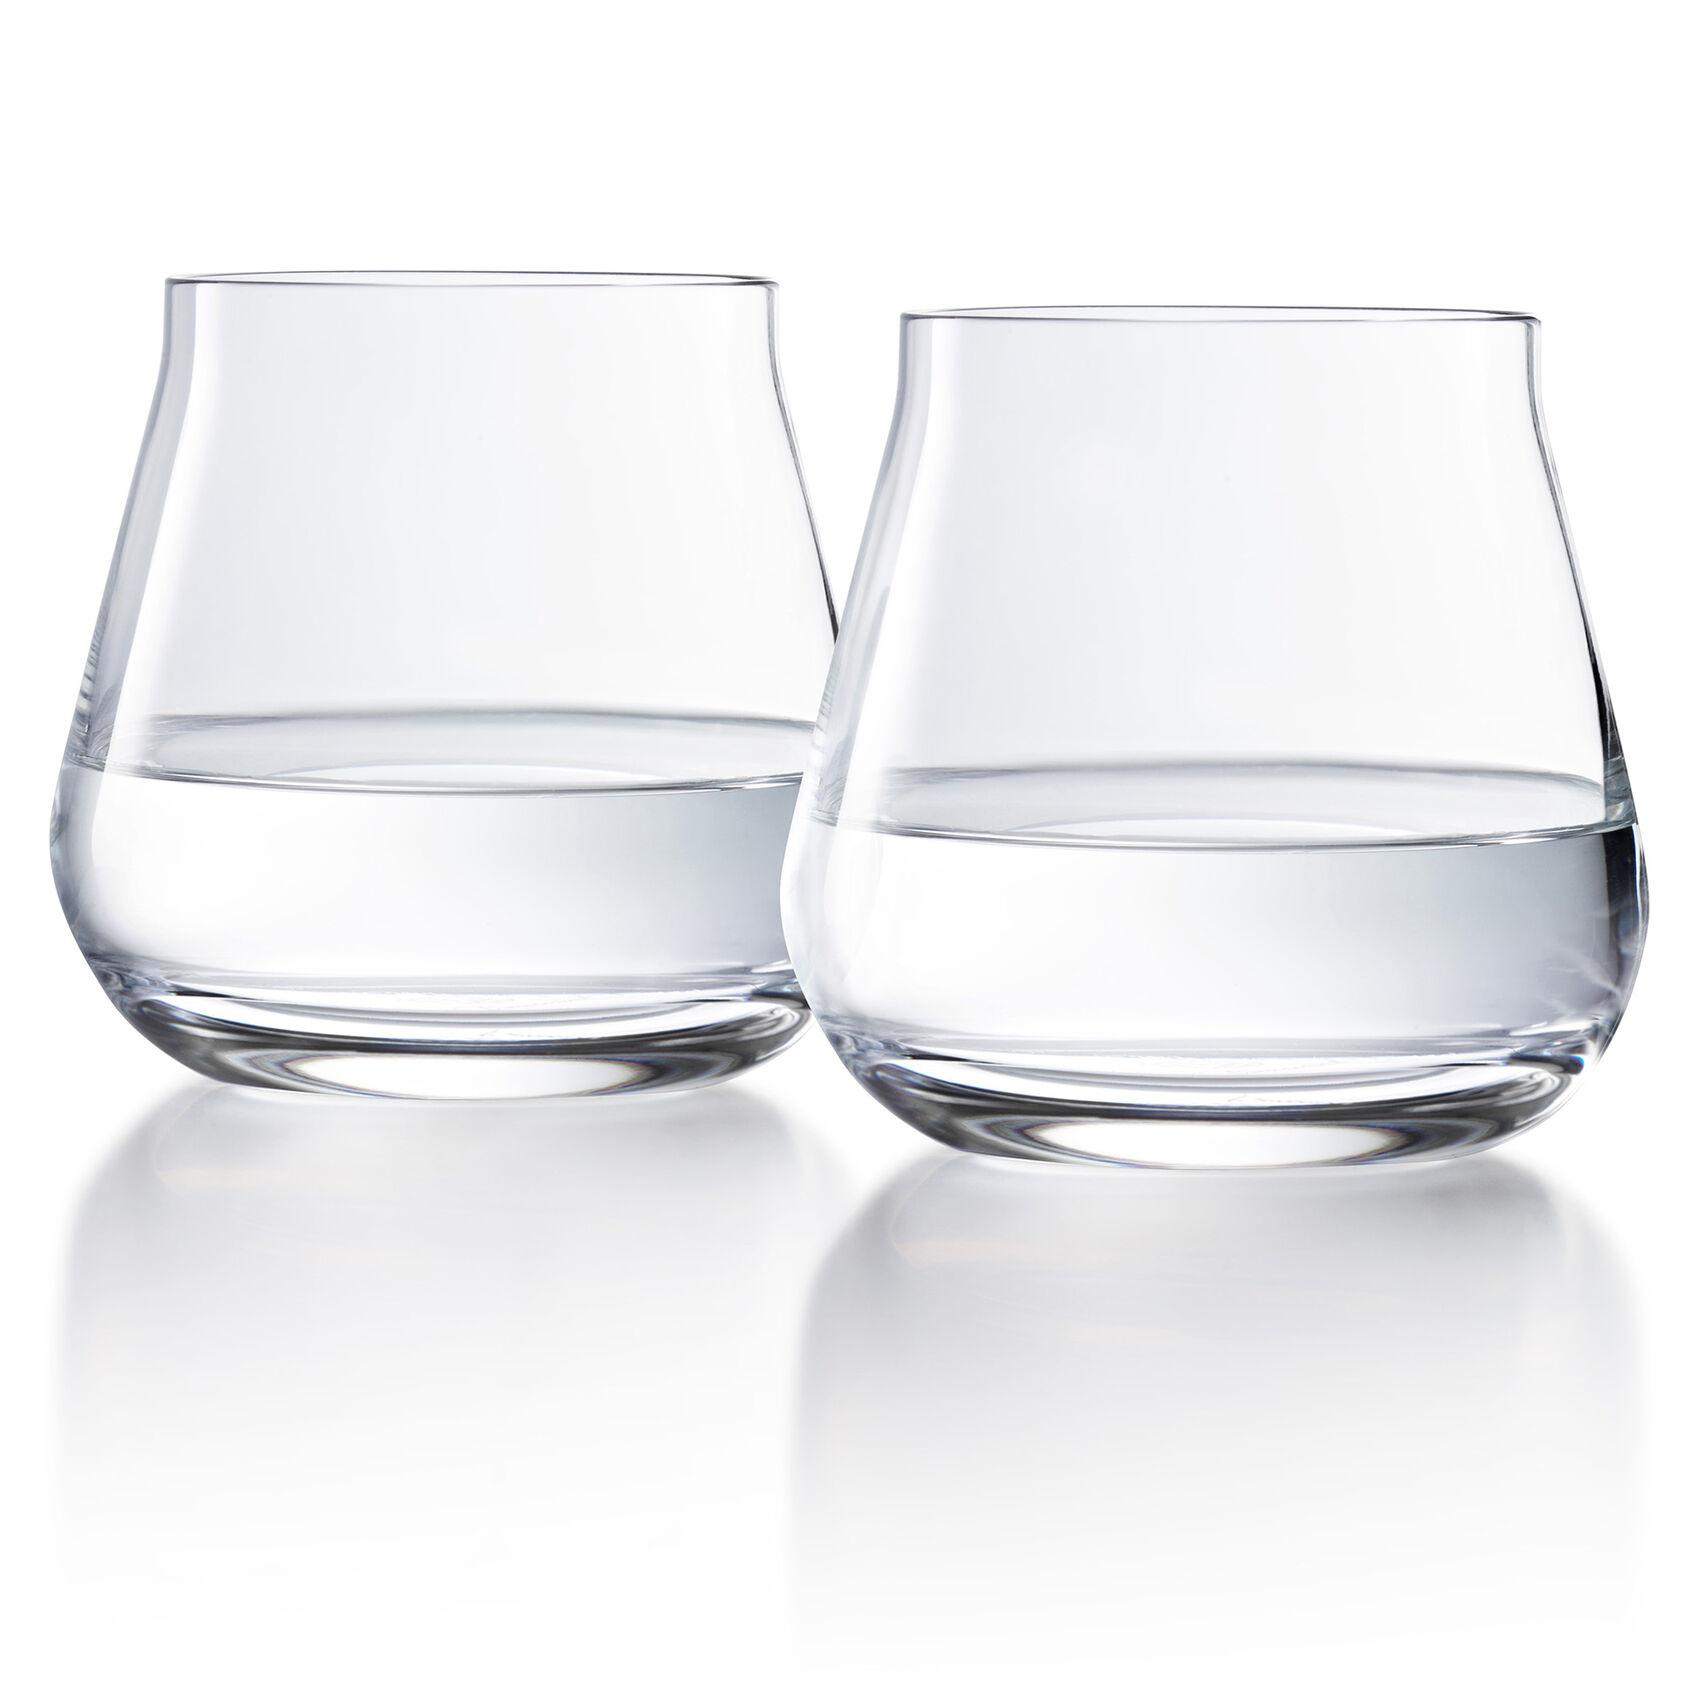 Baccarat Chateau Large Tumblers, set of two